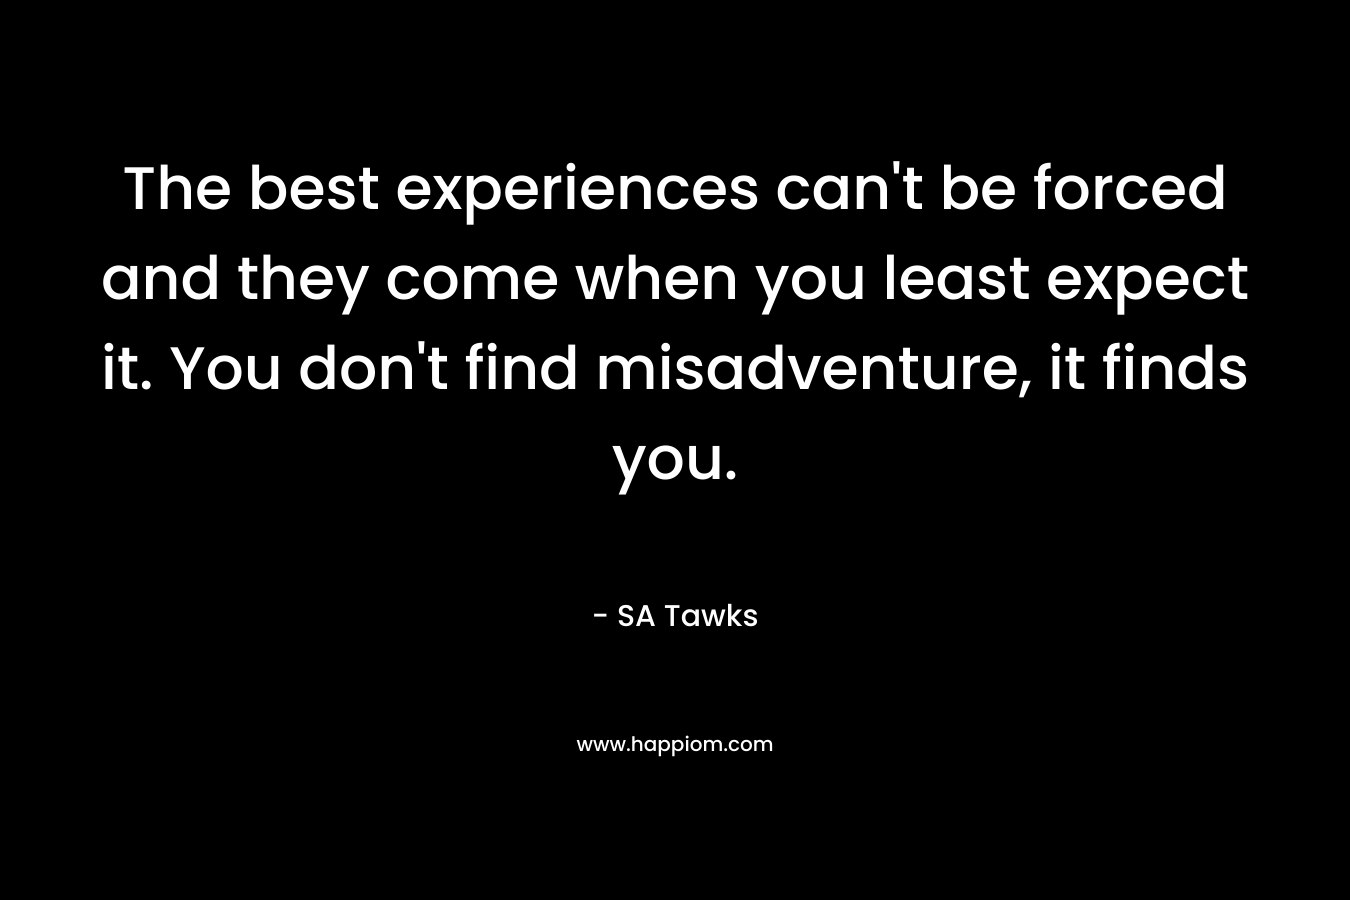 The best experiences can’t be forced and they come when you least expect it. You don’t find misadventure, it finds you. – SA Tawks